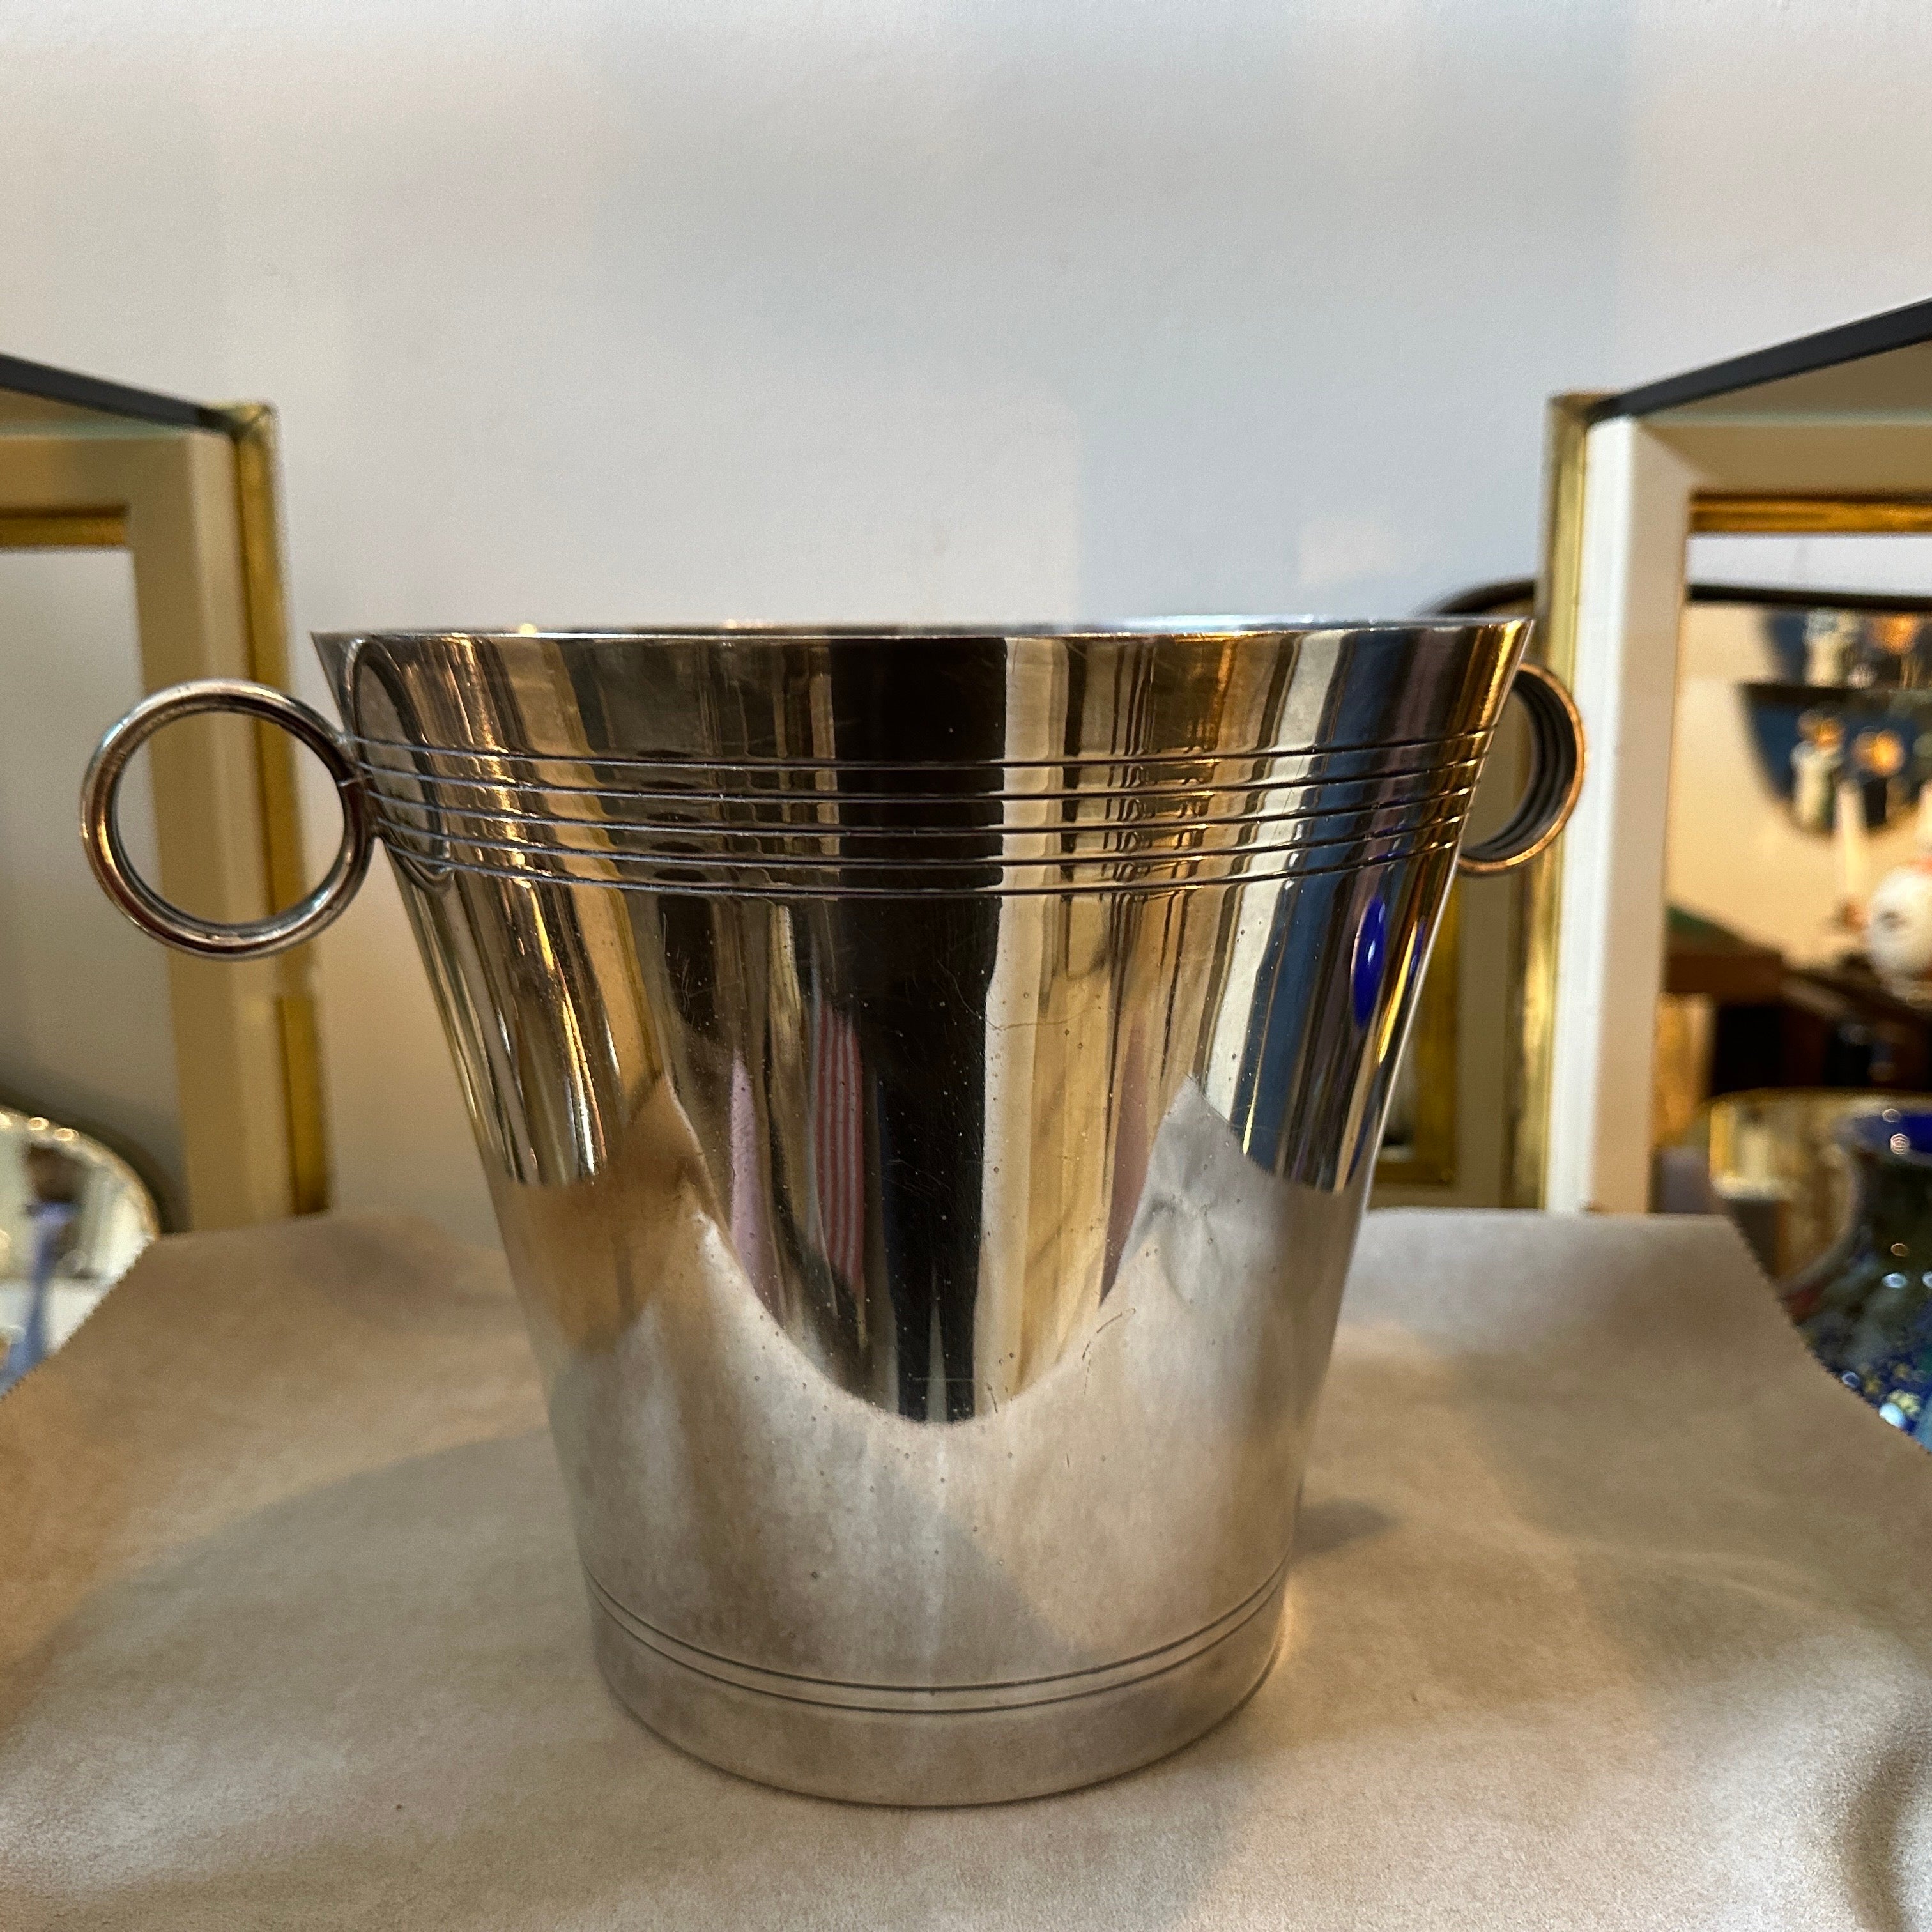 A silver plated champagne bucket designed and manufactured in France in the Fifties, it's in good conditions overall, silver plate is in original patina. It embodies the elegance and glamour of the Art Deco era while also serving as a functional and